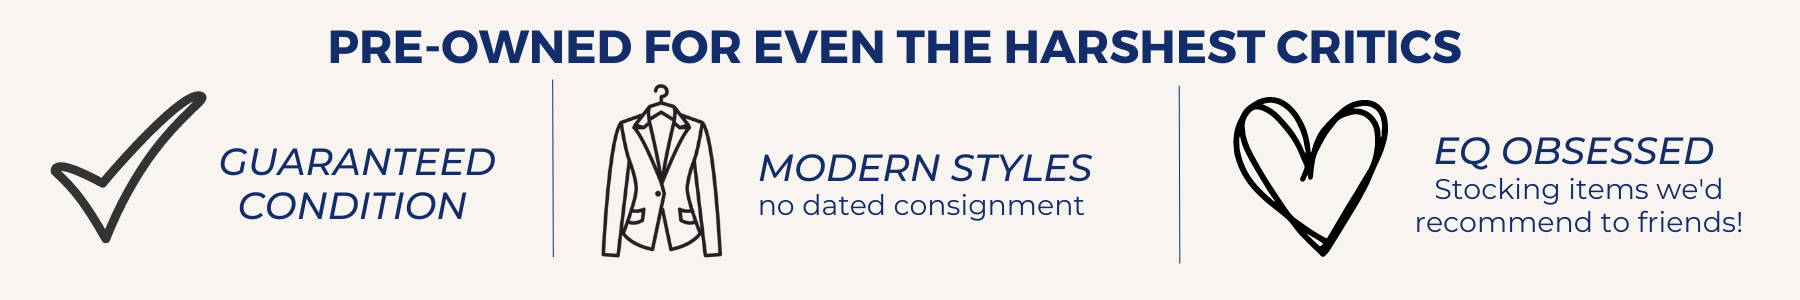 SHOP PREOWNED equestrian in modern styles, guaranteed condition, and highly recommended